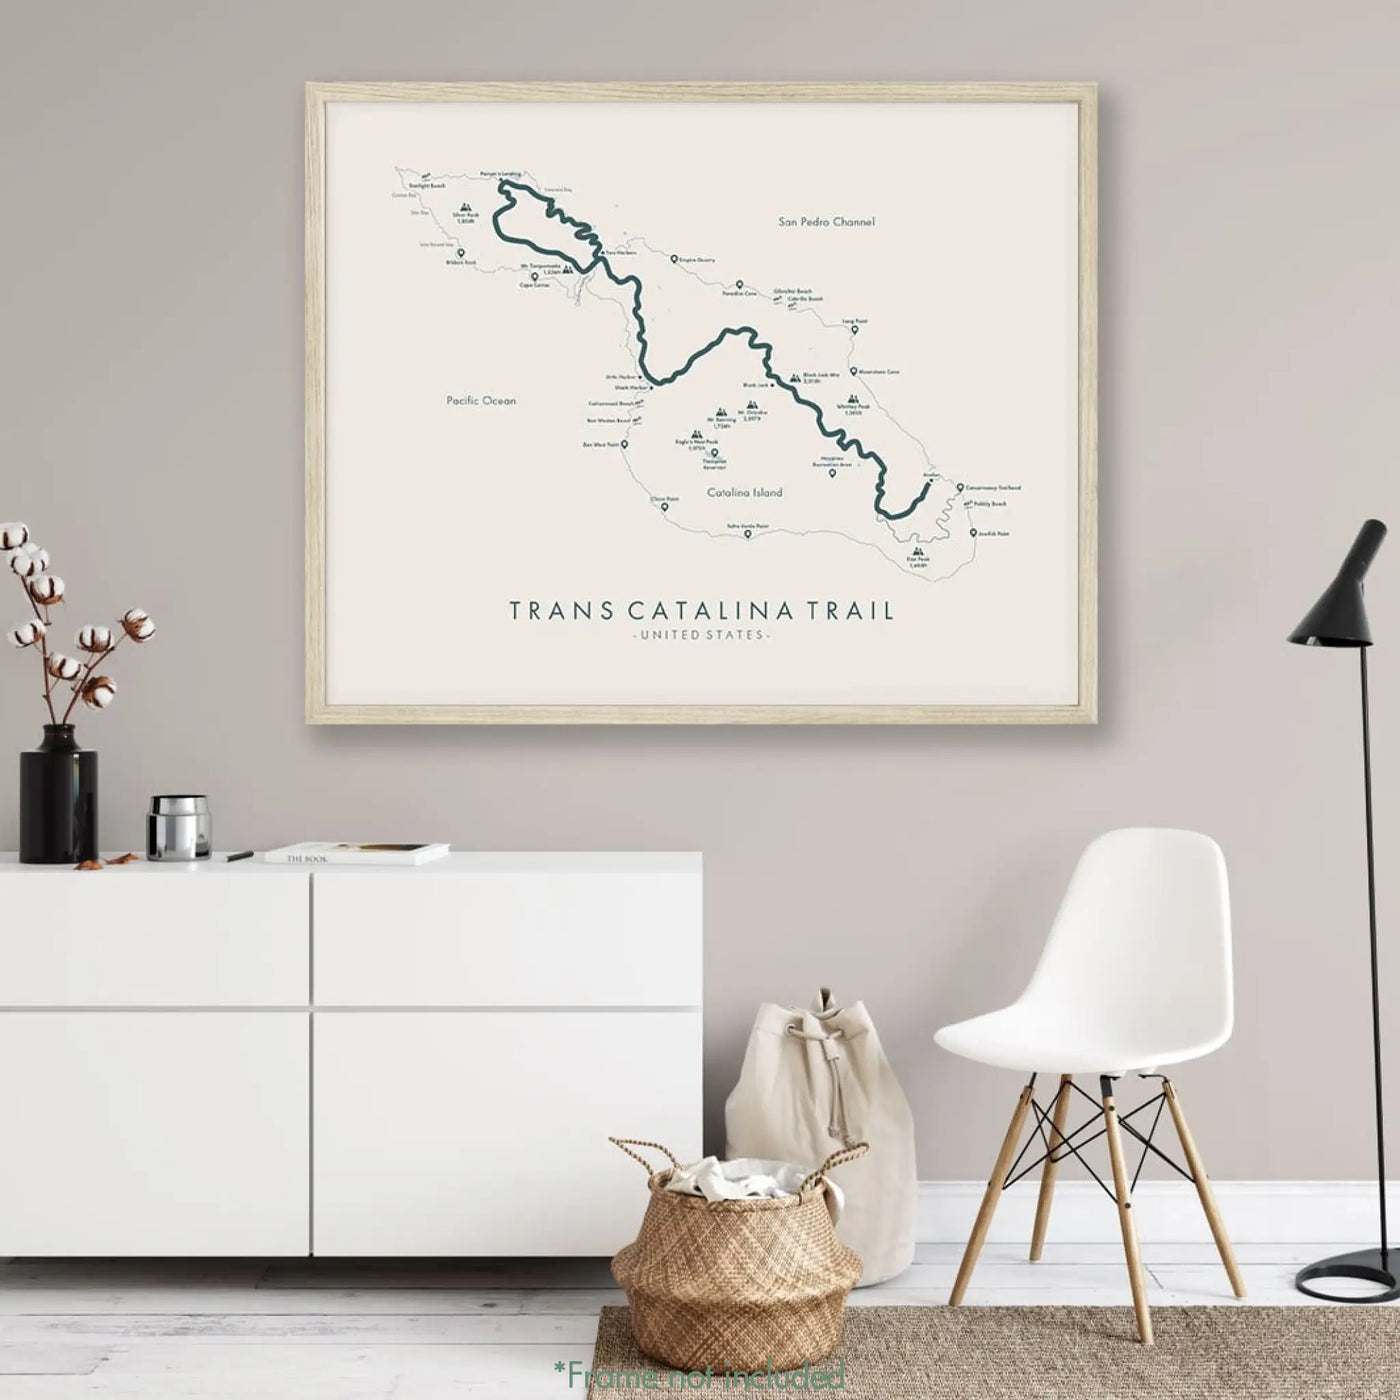 Trail Poster of Trans Catalina Trail - Beige Mockup